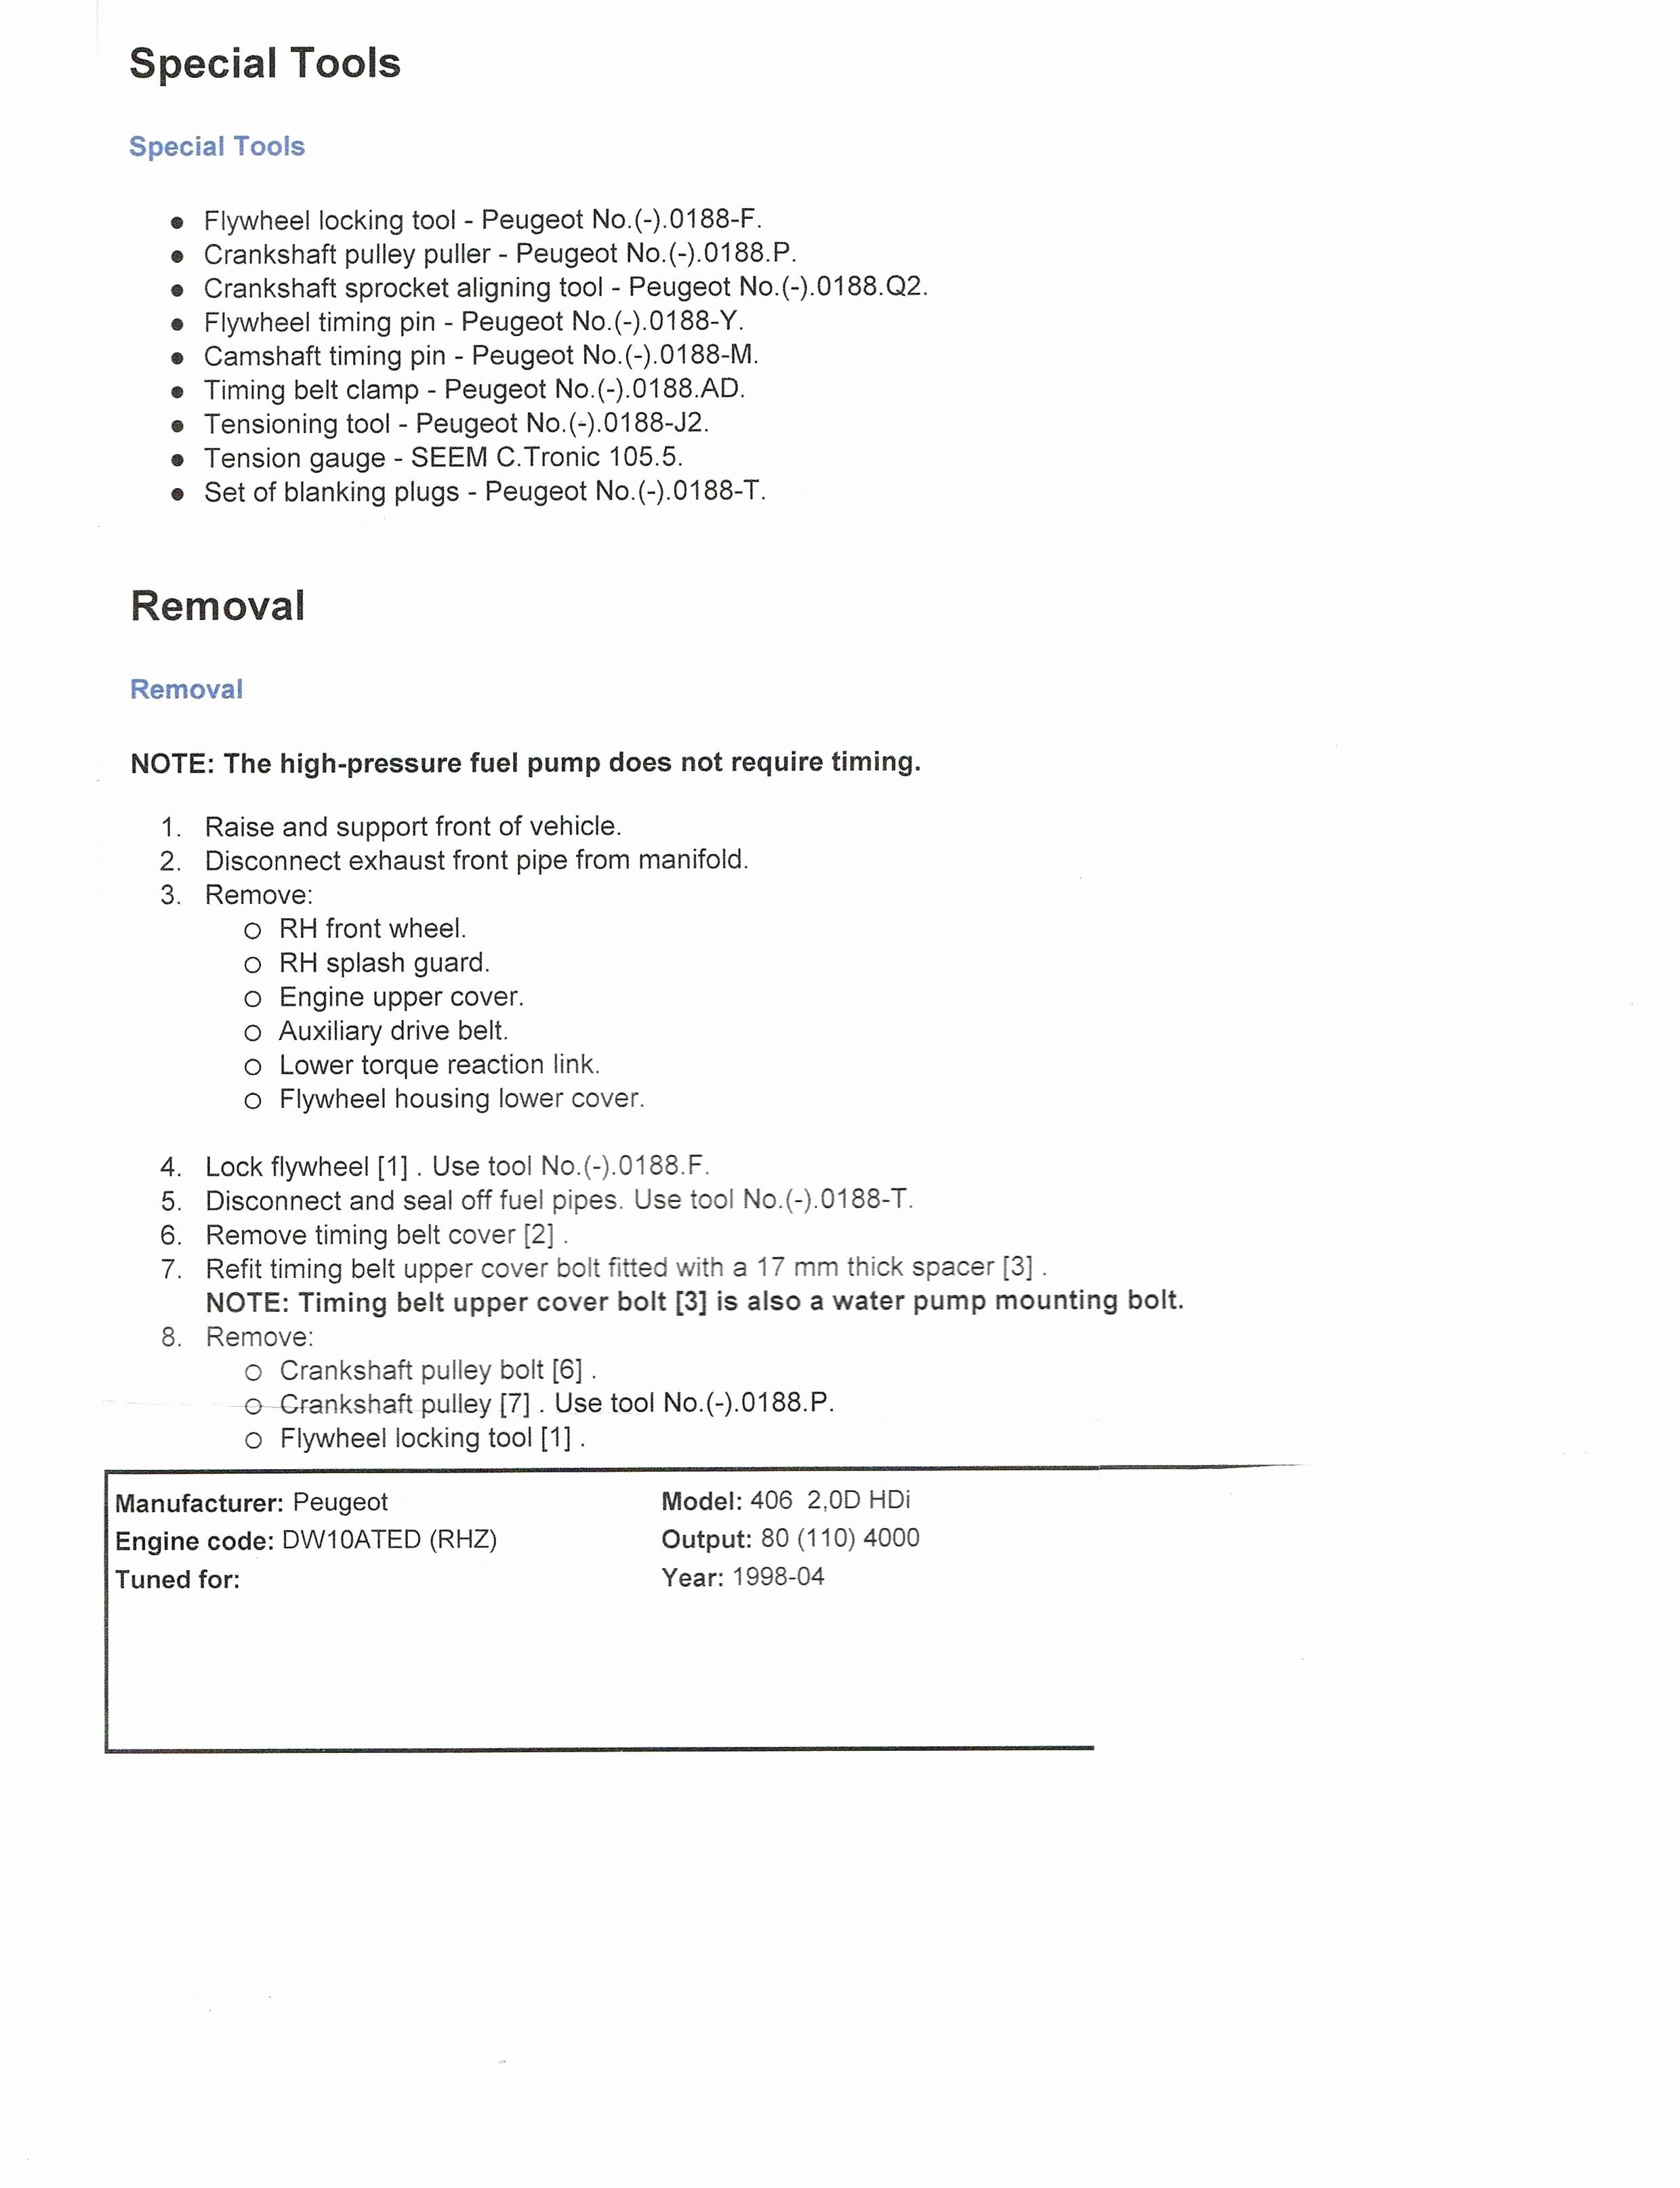 proper cover letter template example-Resume Letter Templates Valid Cover Letter for Resume Awesome Resume Examples 0d Good Looking 4-a